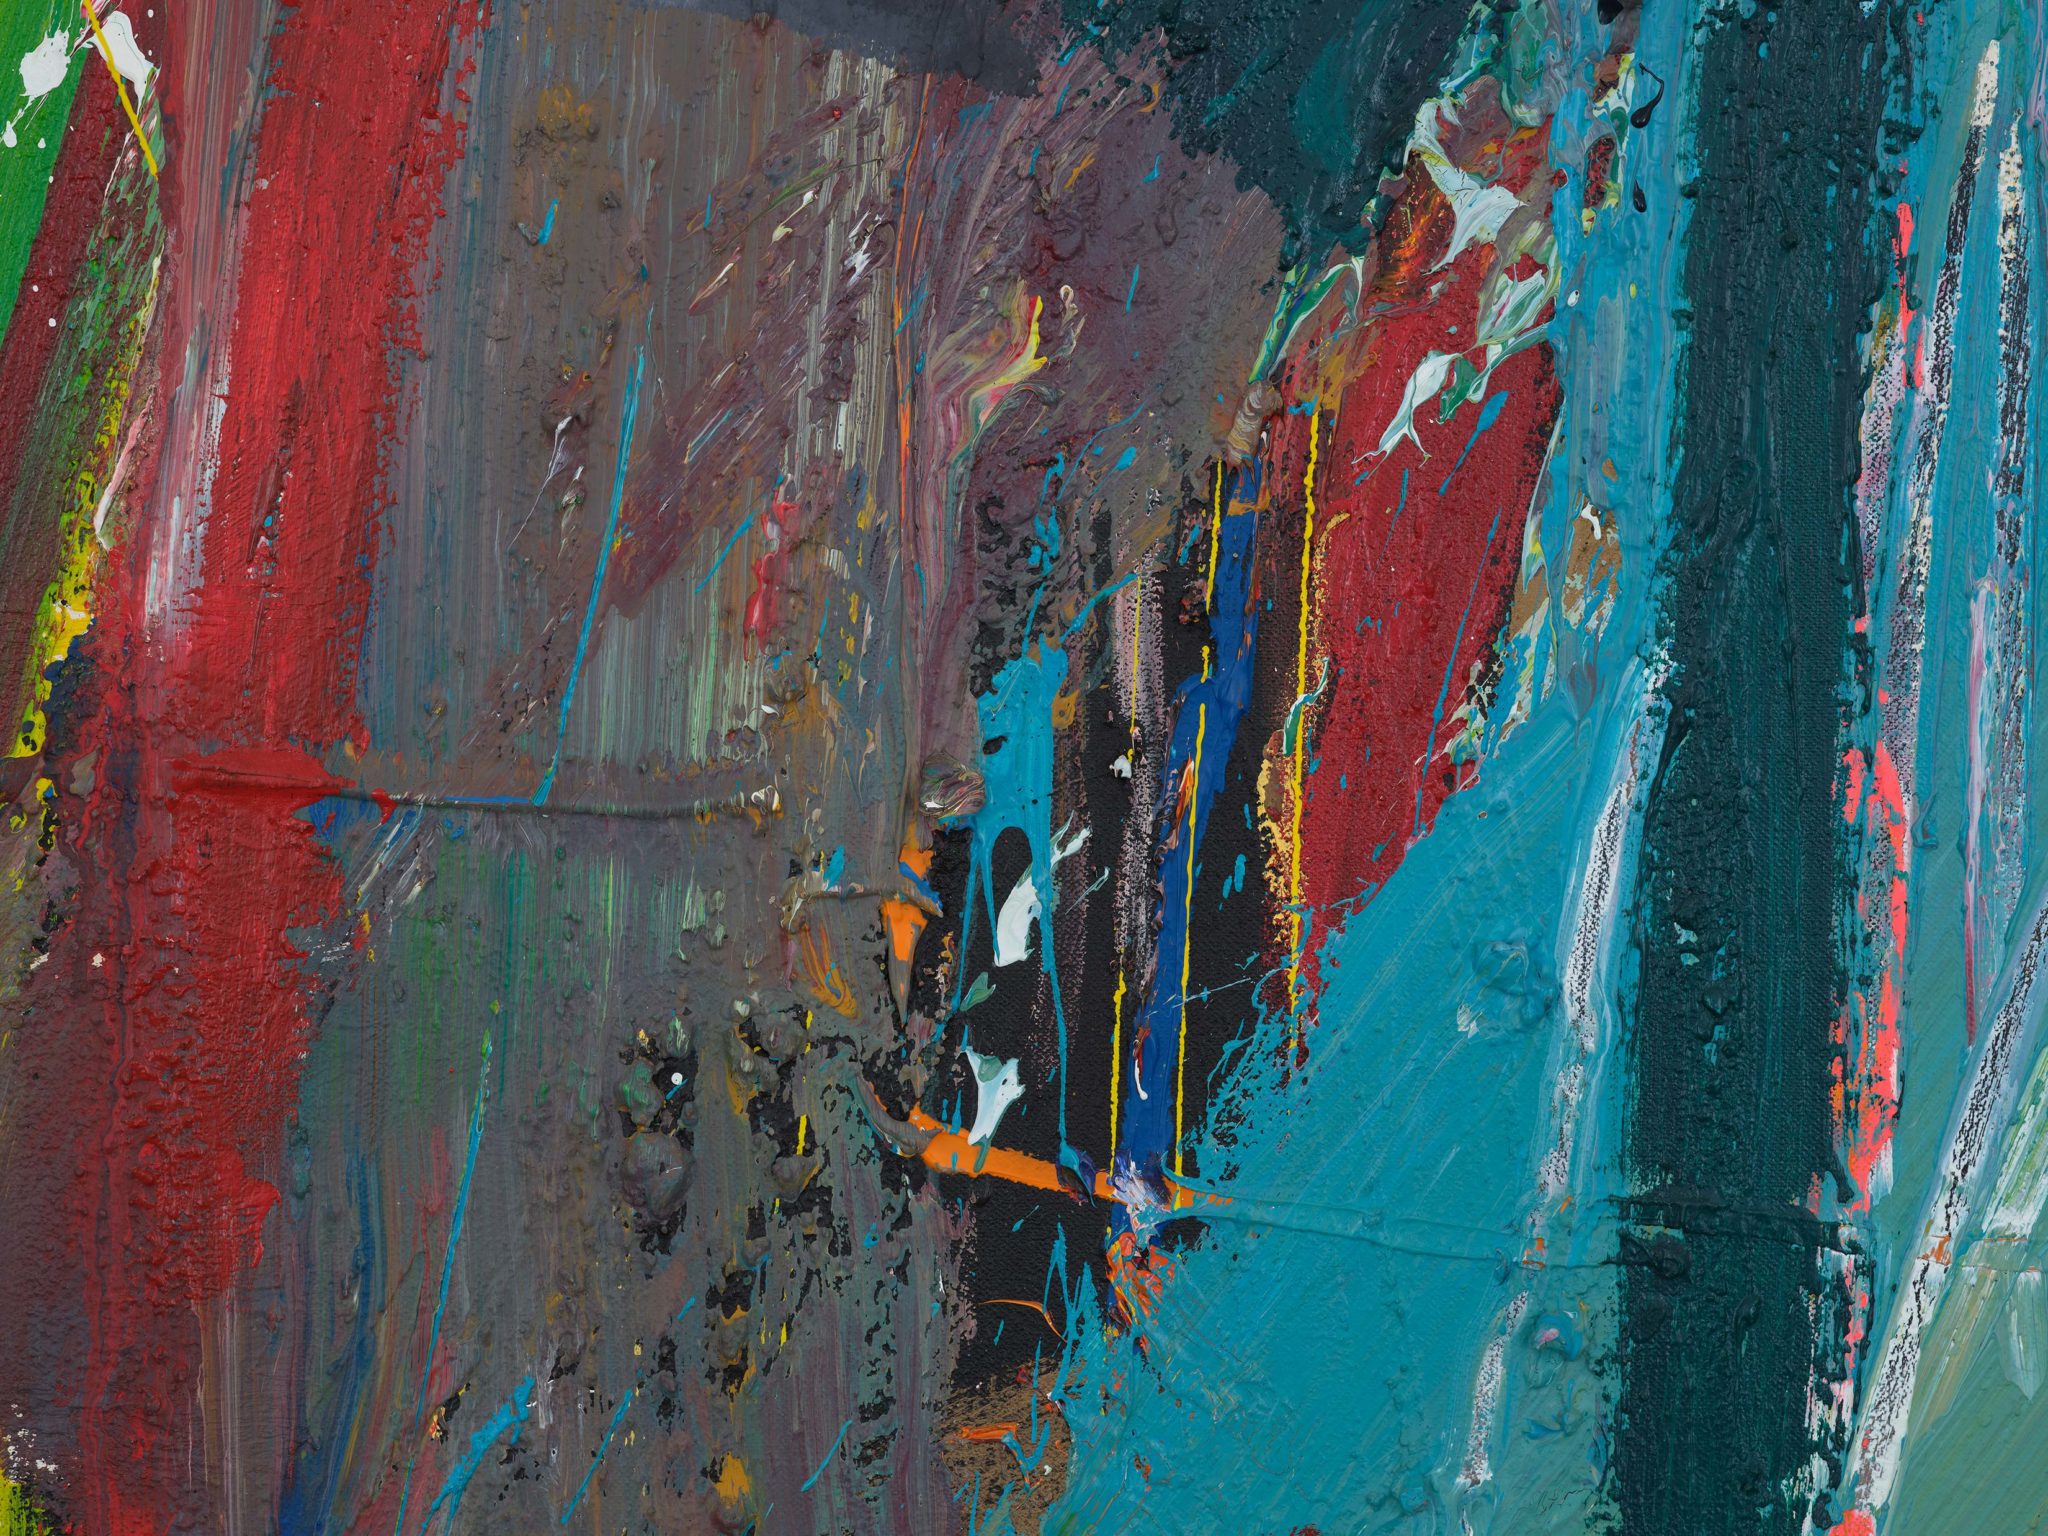 Detail shot of Jean-Michel Basquiat's painting Untitled (1982)